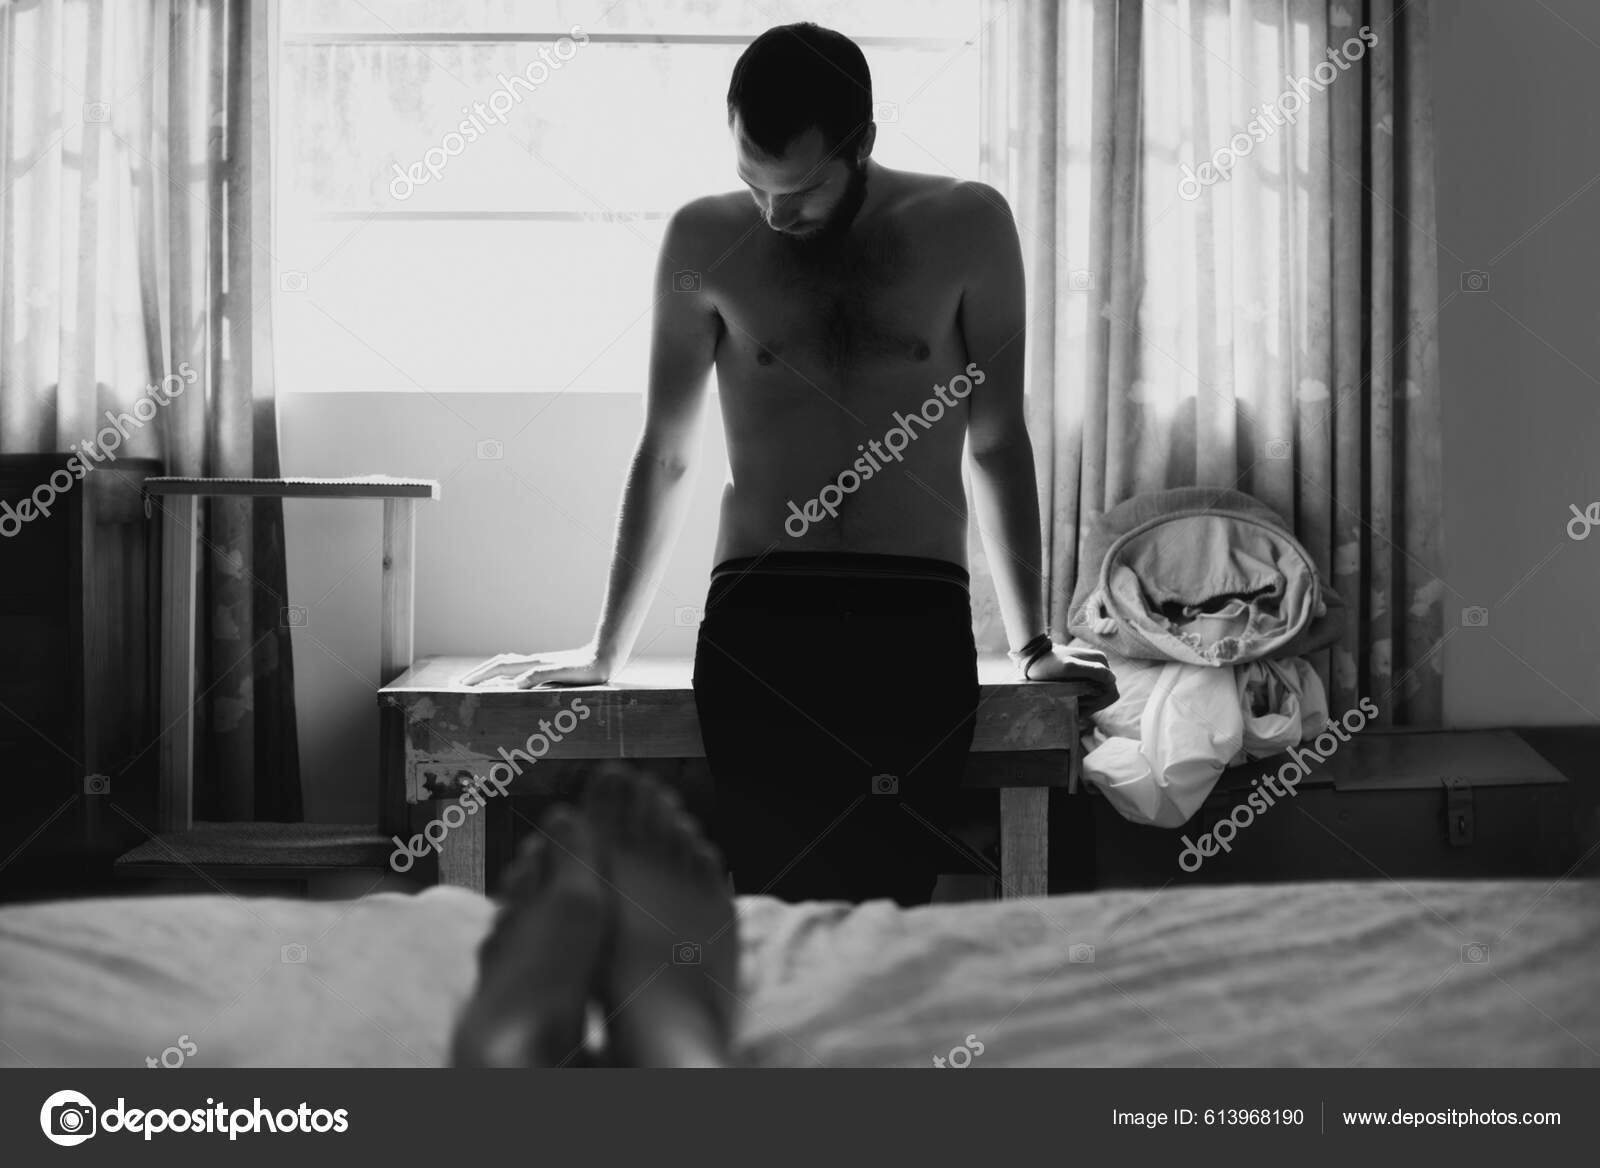 Struggling Weight Guilt Regret Young Man Standing End Bed Looking Stock Photo by ©PeopleImages 613968190 pic pic